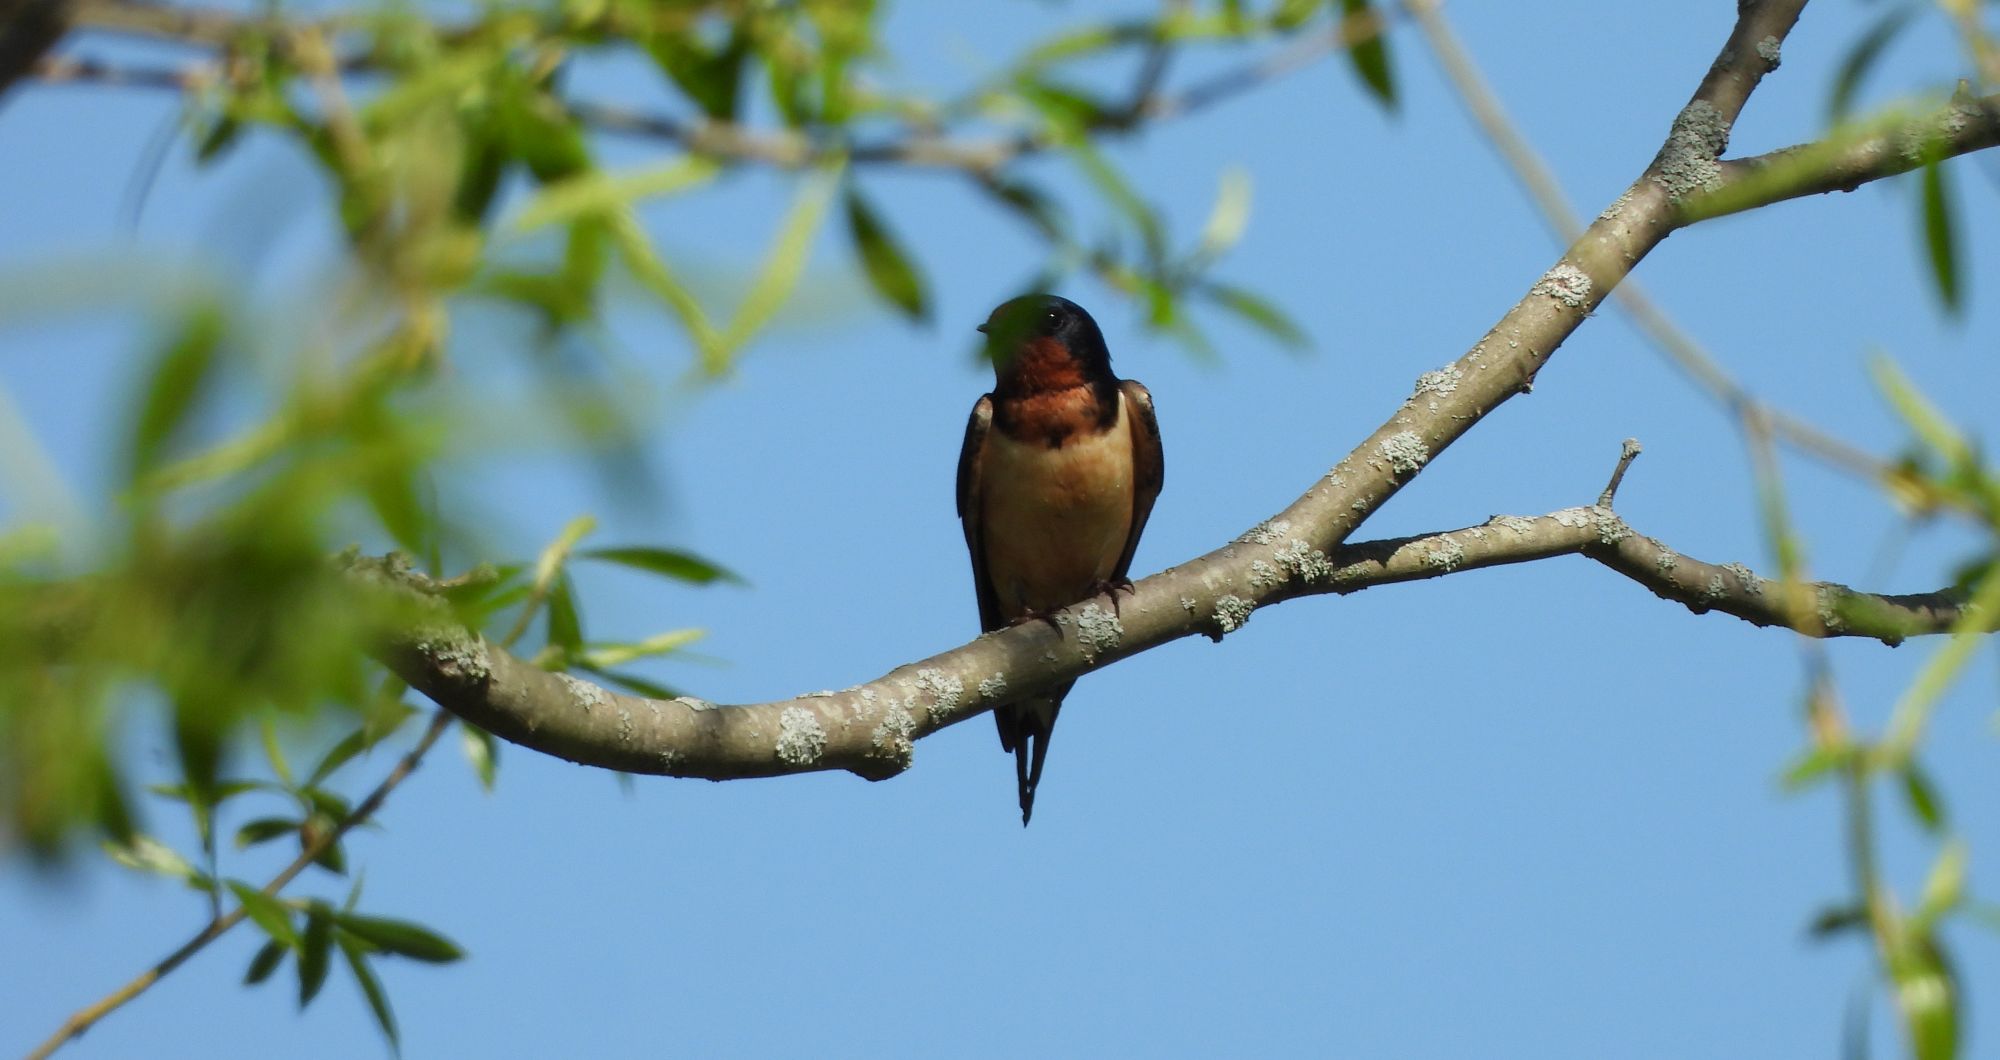 Barn Swallow perched on the branch of a tree